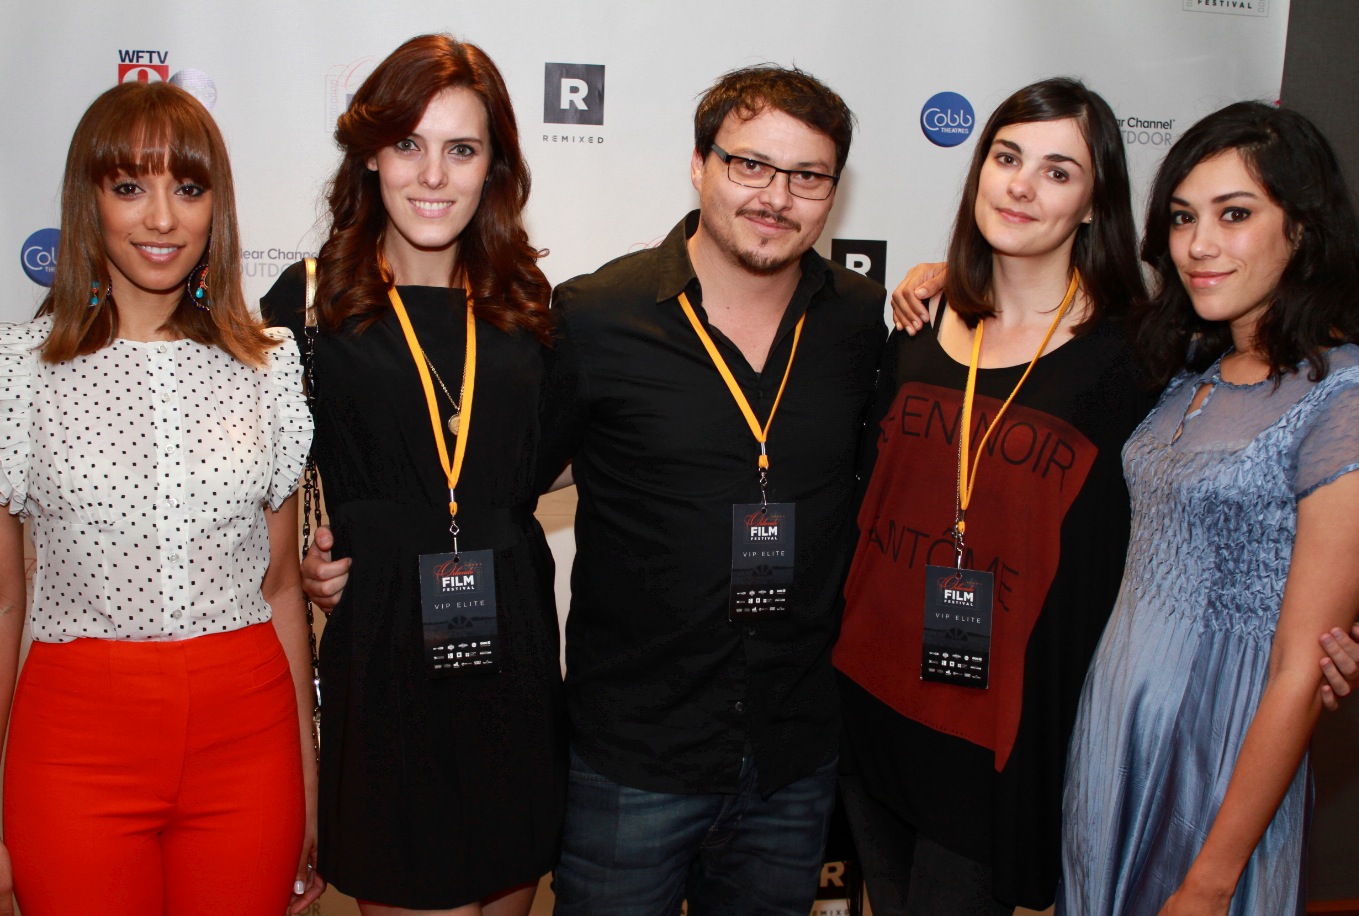 Leah Briese, Adriana Mather, James Bird, Anya Remizova, and Mishel Prada on the red carpet at the Orlando Film Fetival.